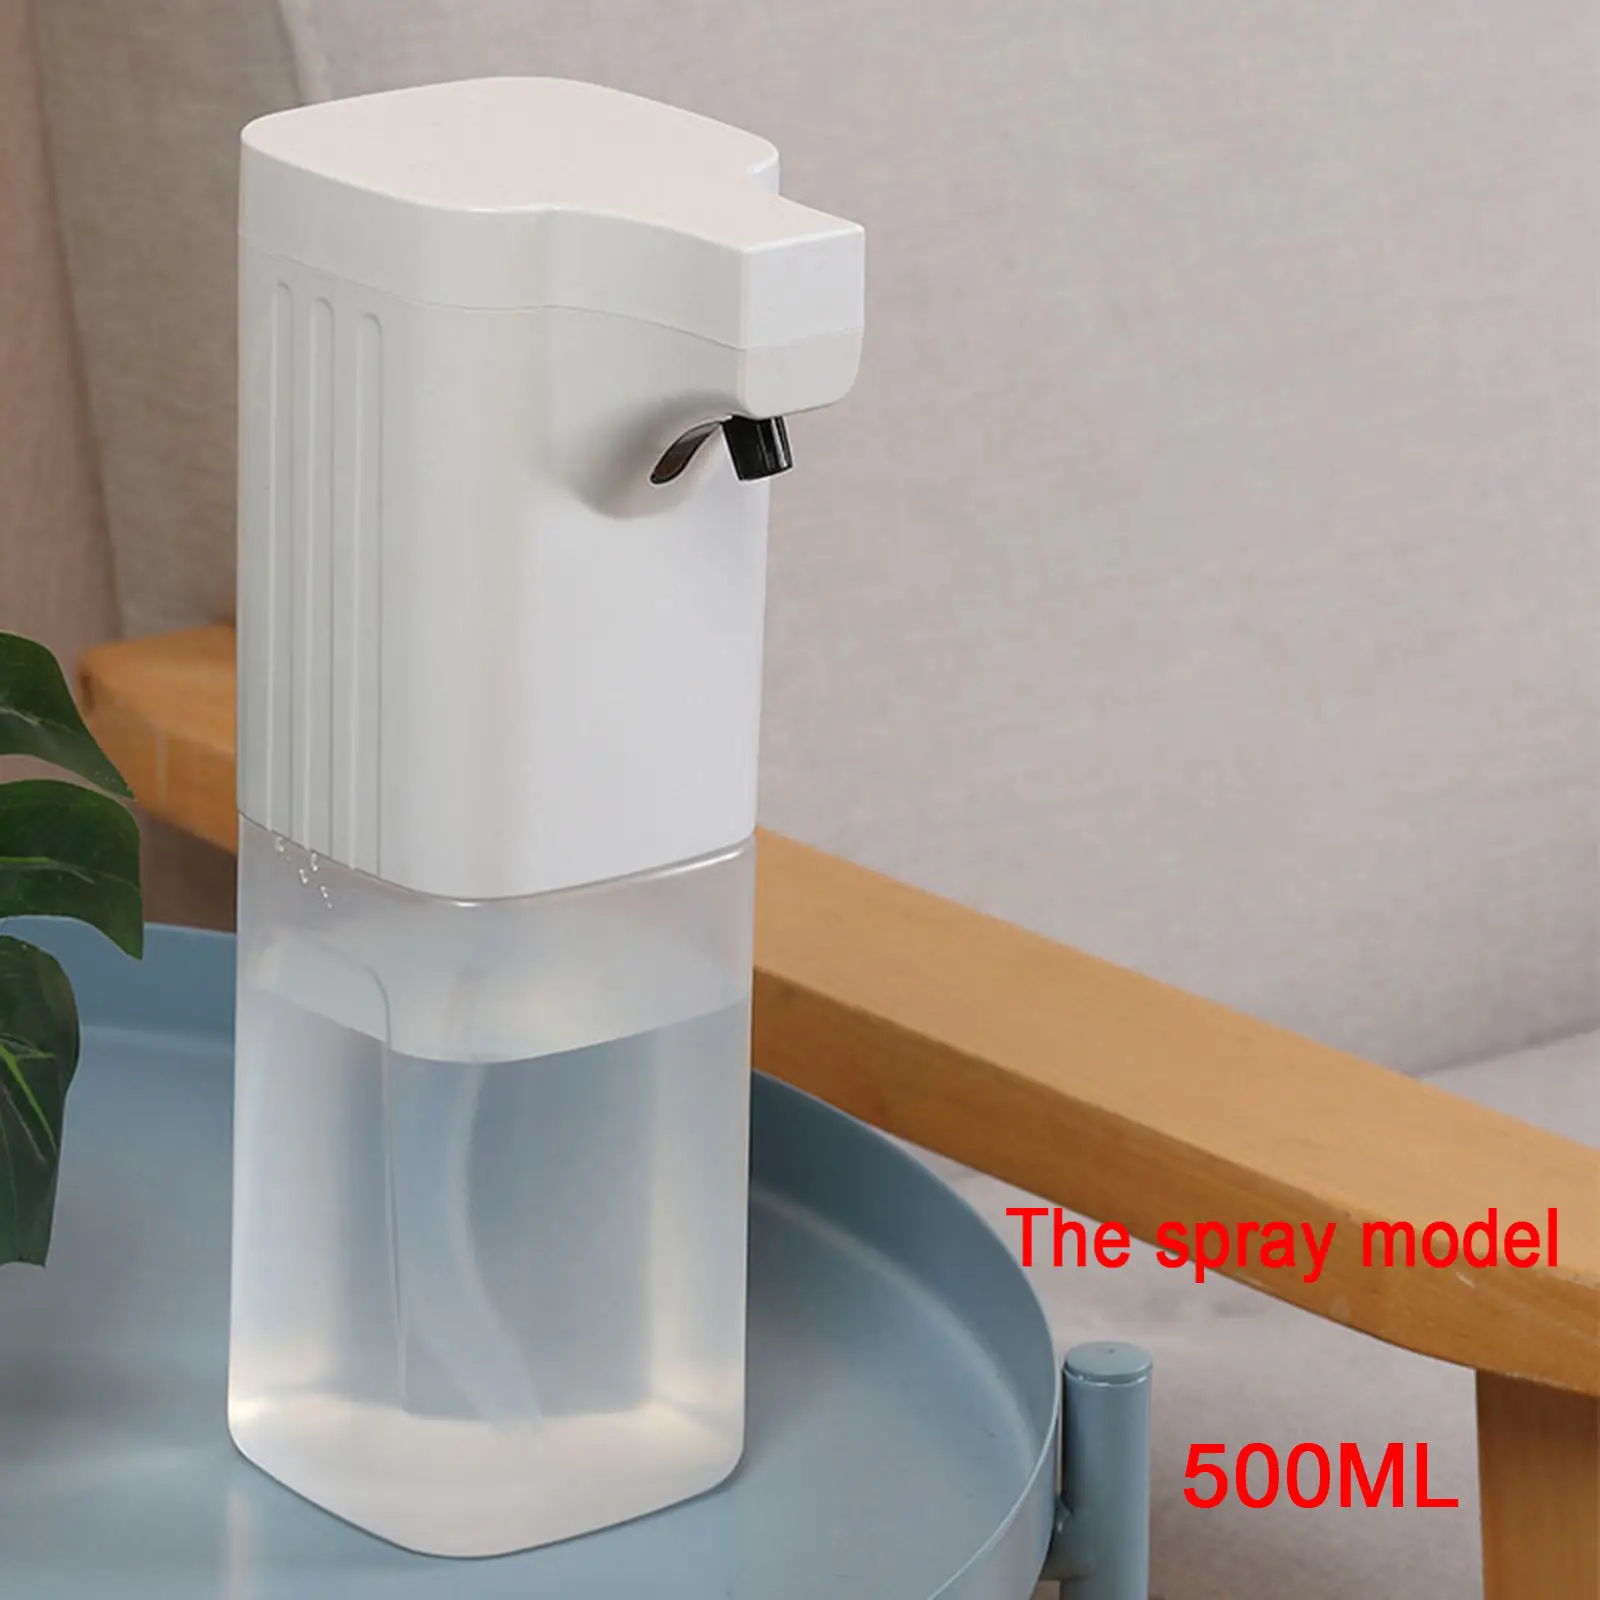 Foaming Dispenser Foam Disinfection Machine Wall Mounted  Touchless  for Office Salon Bathroom